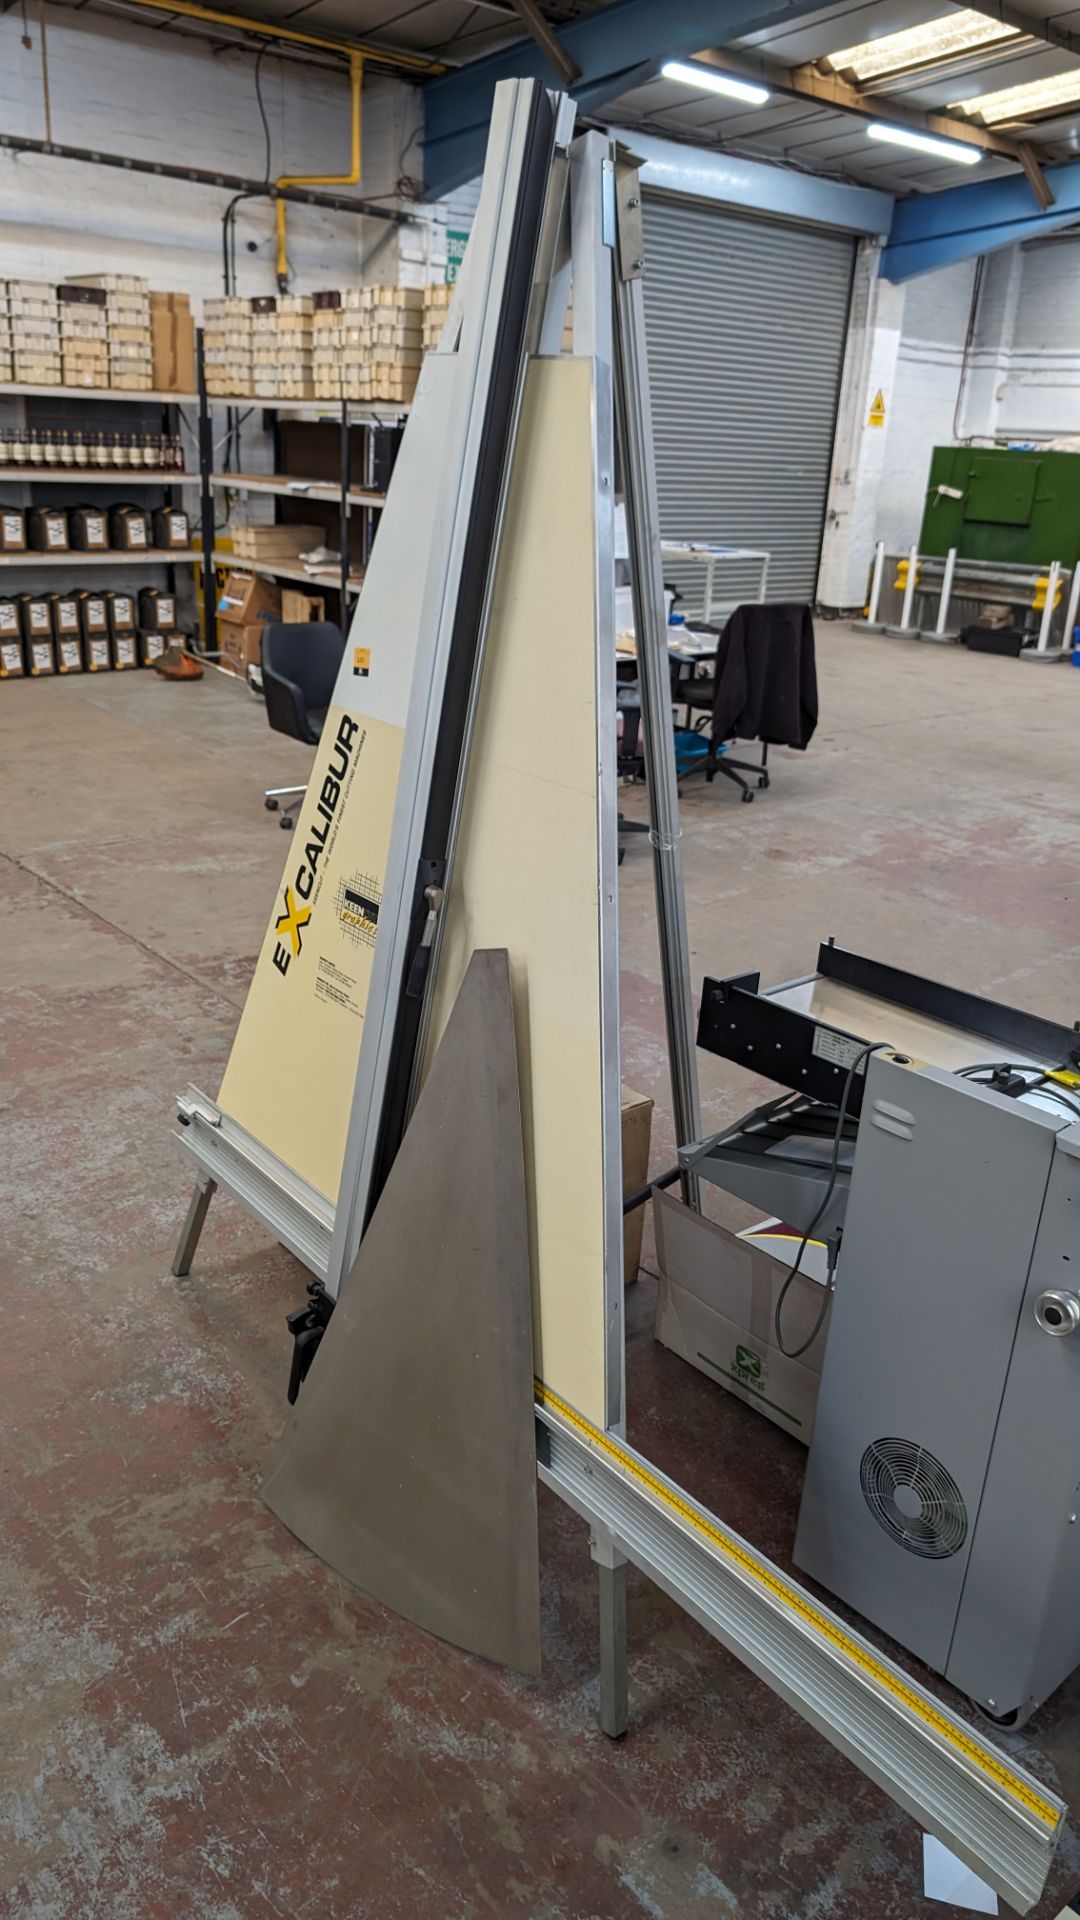 Keencut Graphics Excalibur A frame cutter. Height approximately 2330mm, max width including measuri - Image 10 of 13